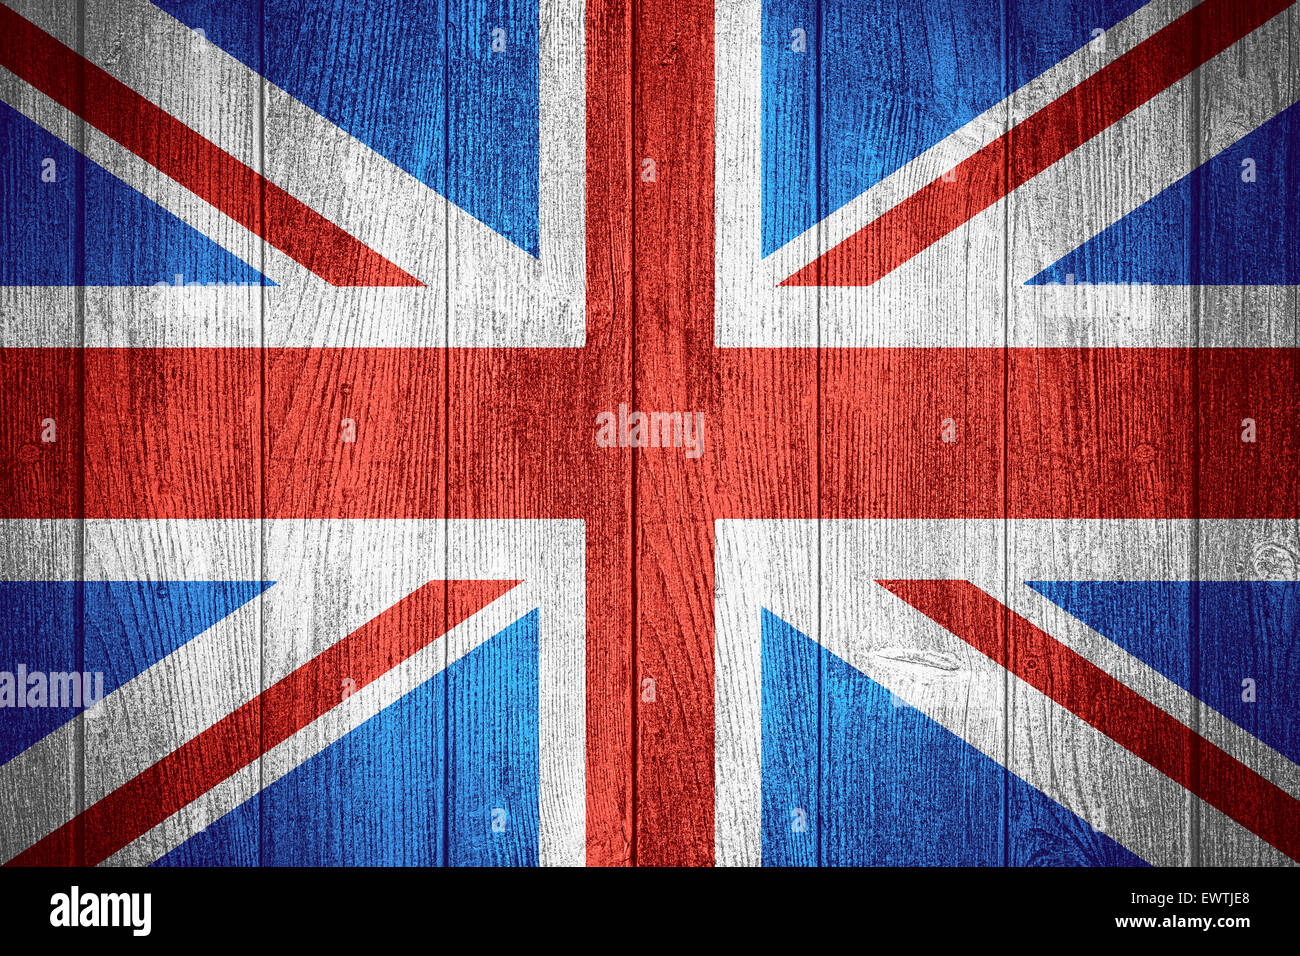 United Kingdom flag or British banner on wooden boards background, Great Britain Stock Photo